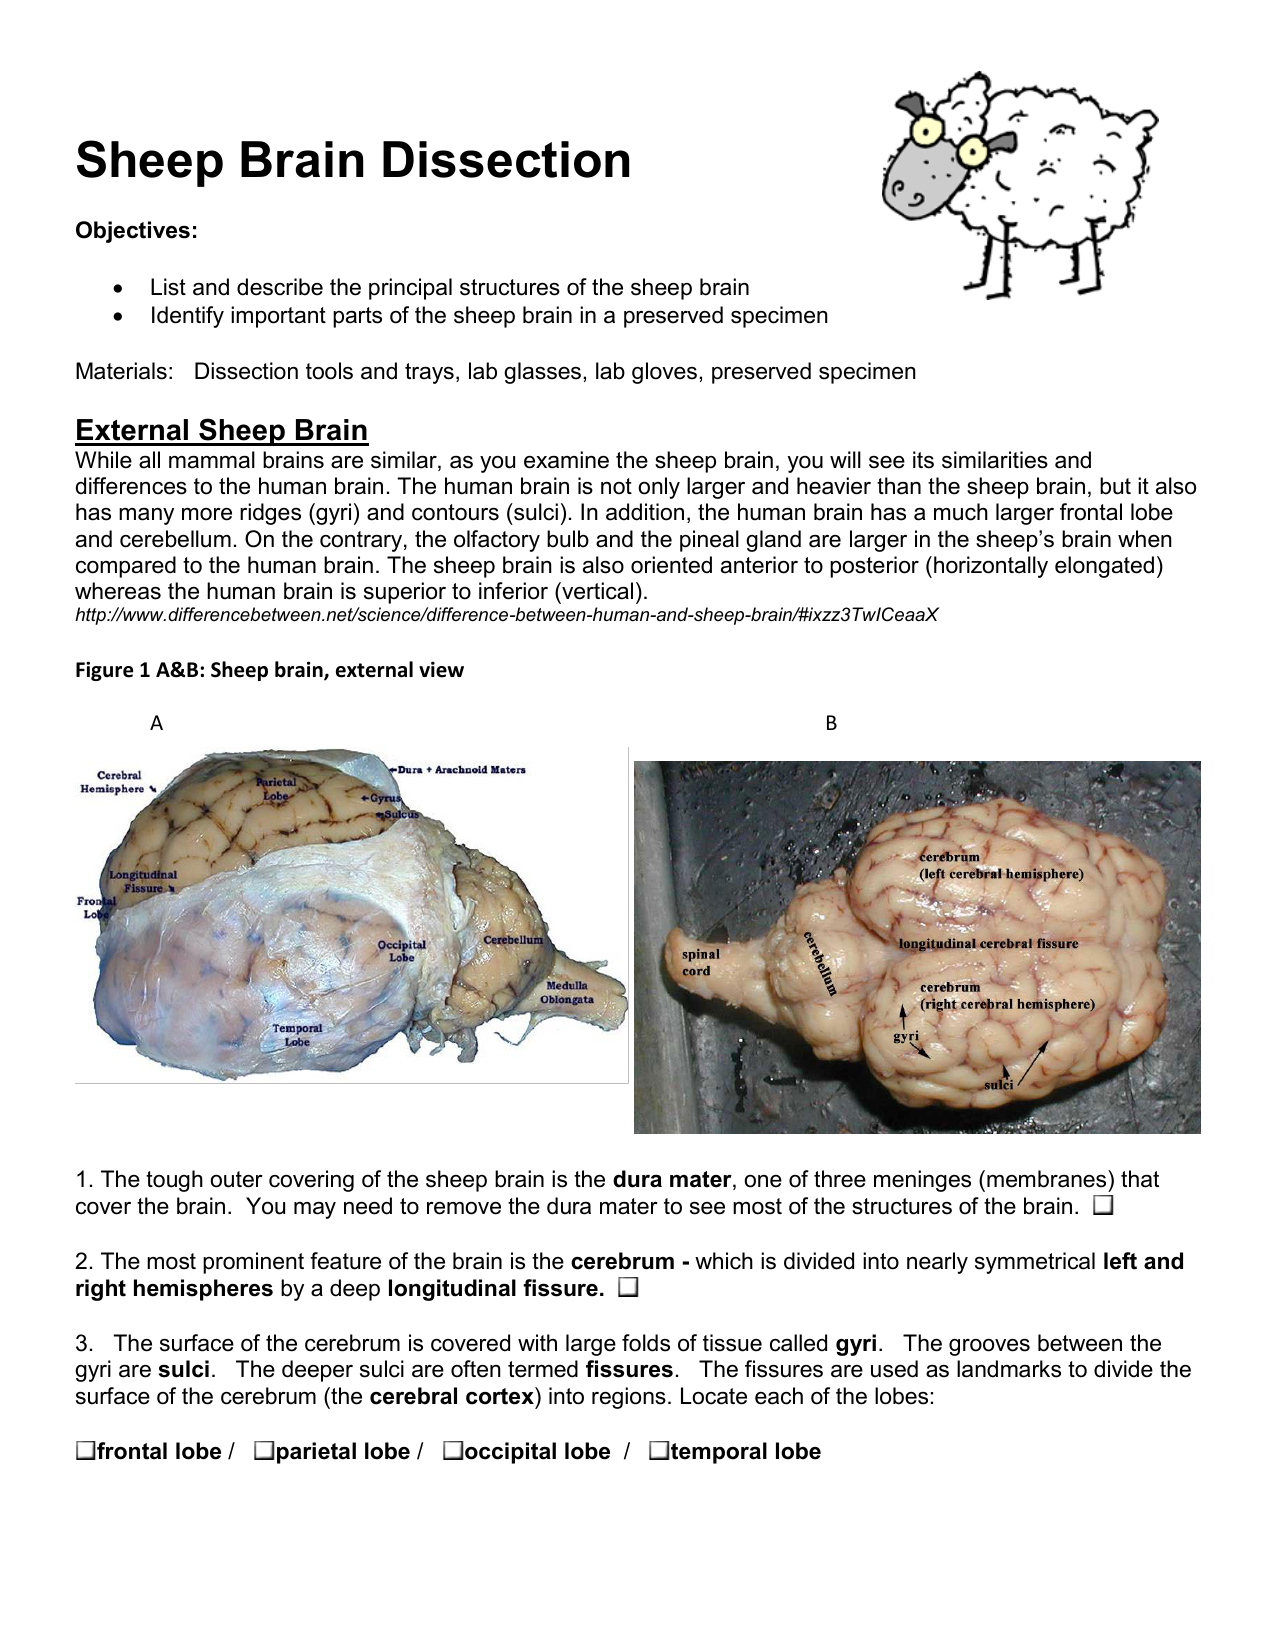 Sheep Brain Dissection In Sheep Brain Dissection Worksheet